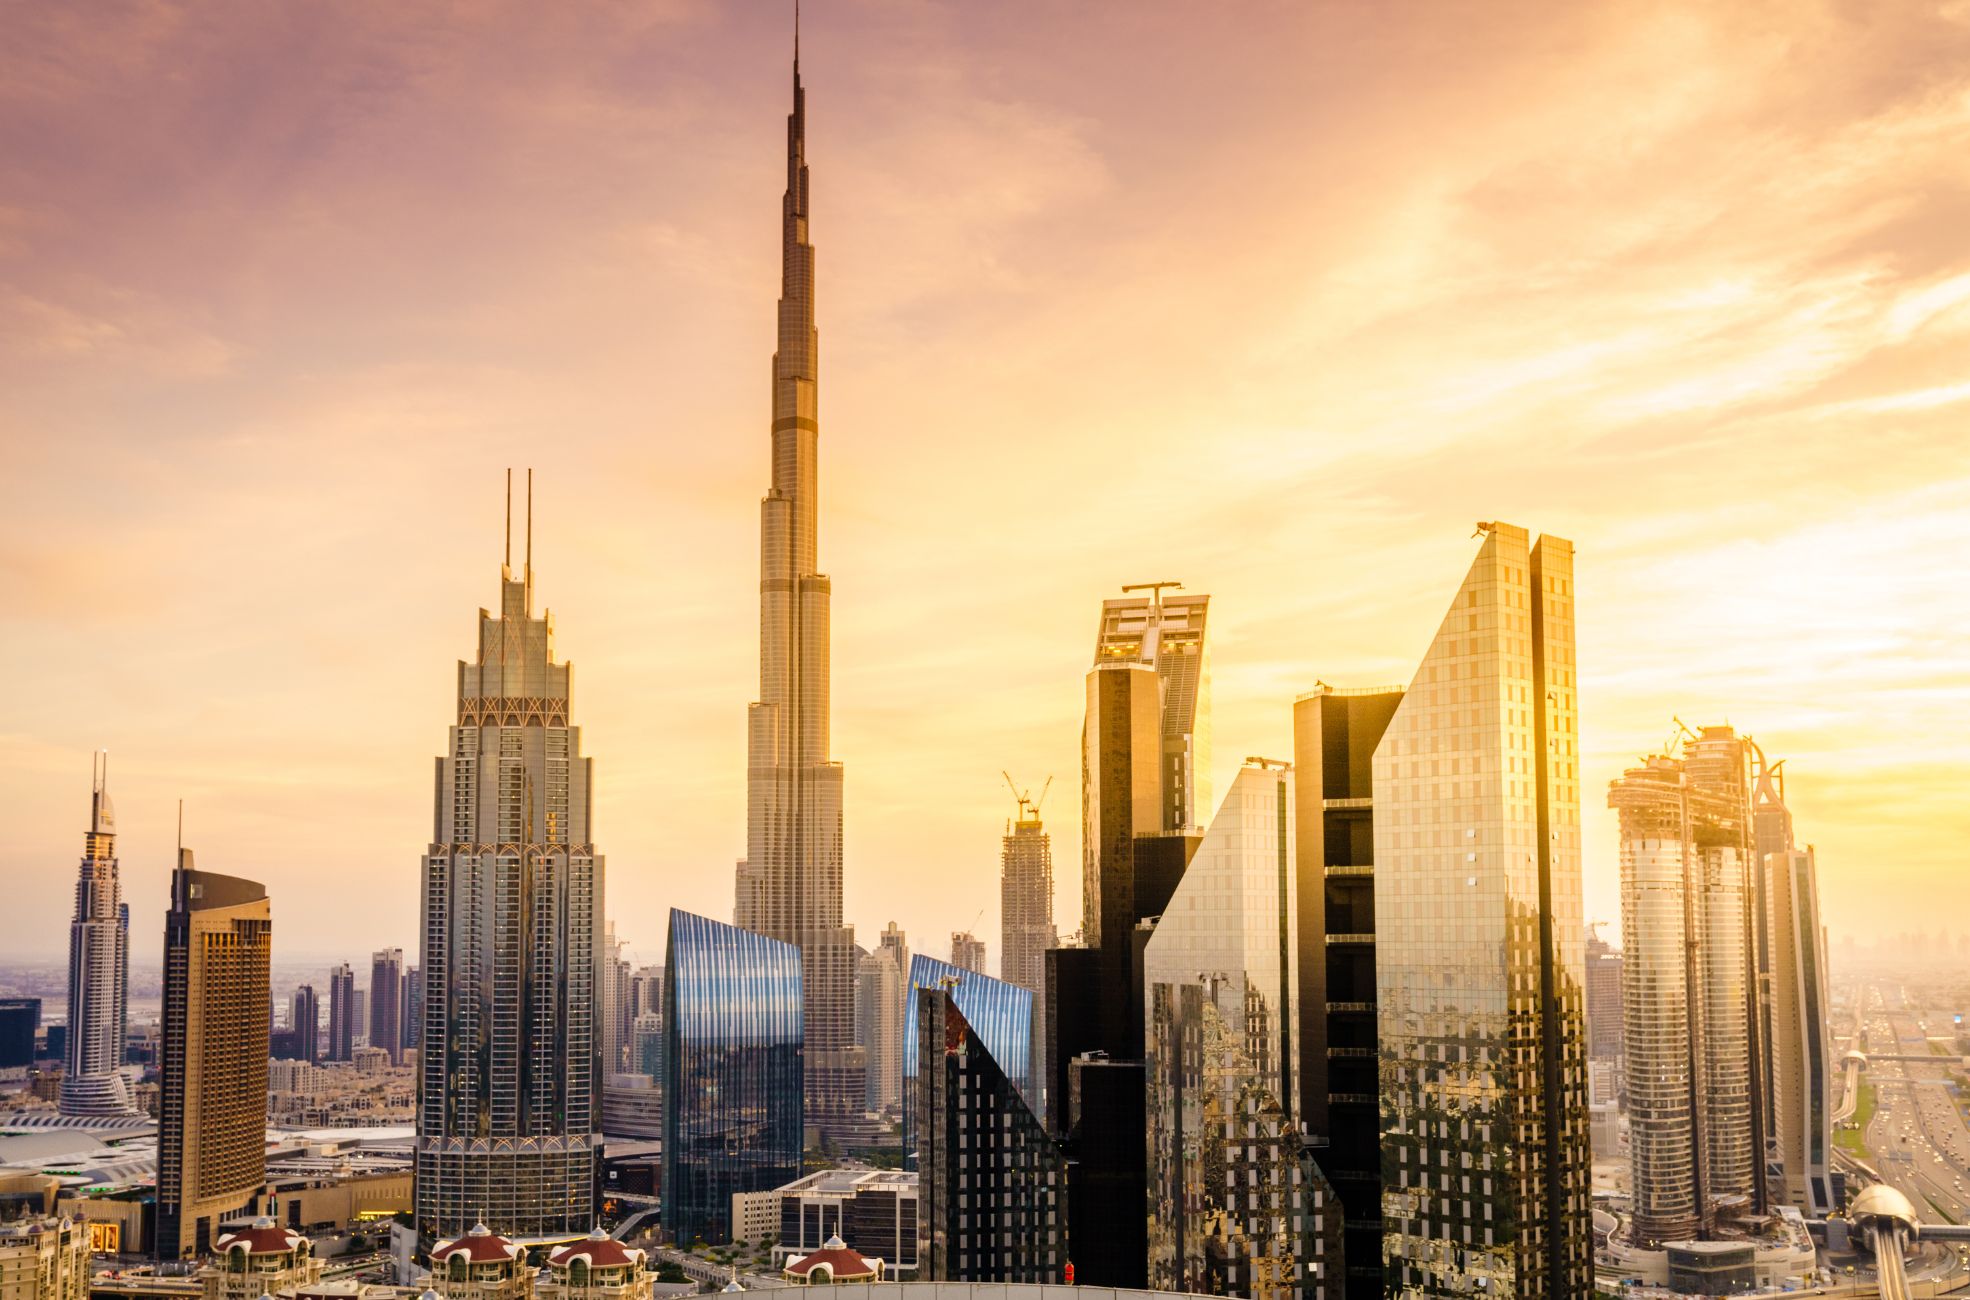 A picture of Dubai with the evening sun shining on buildings.